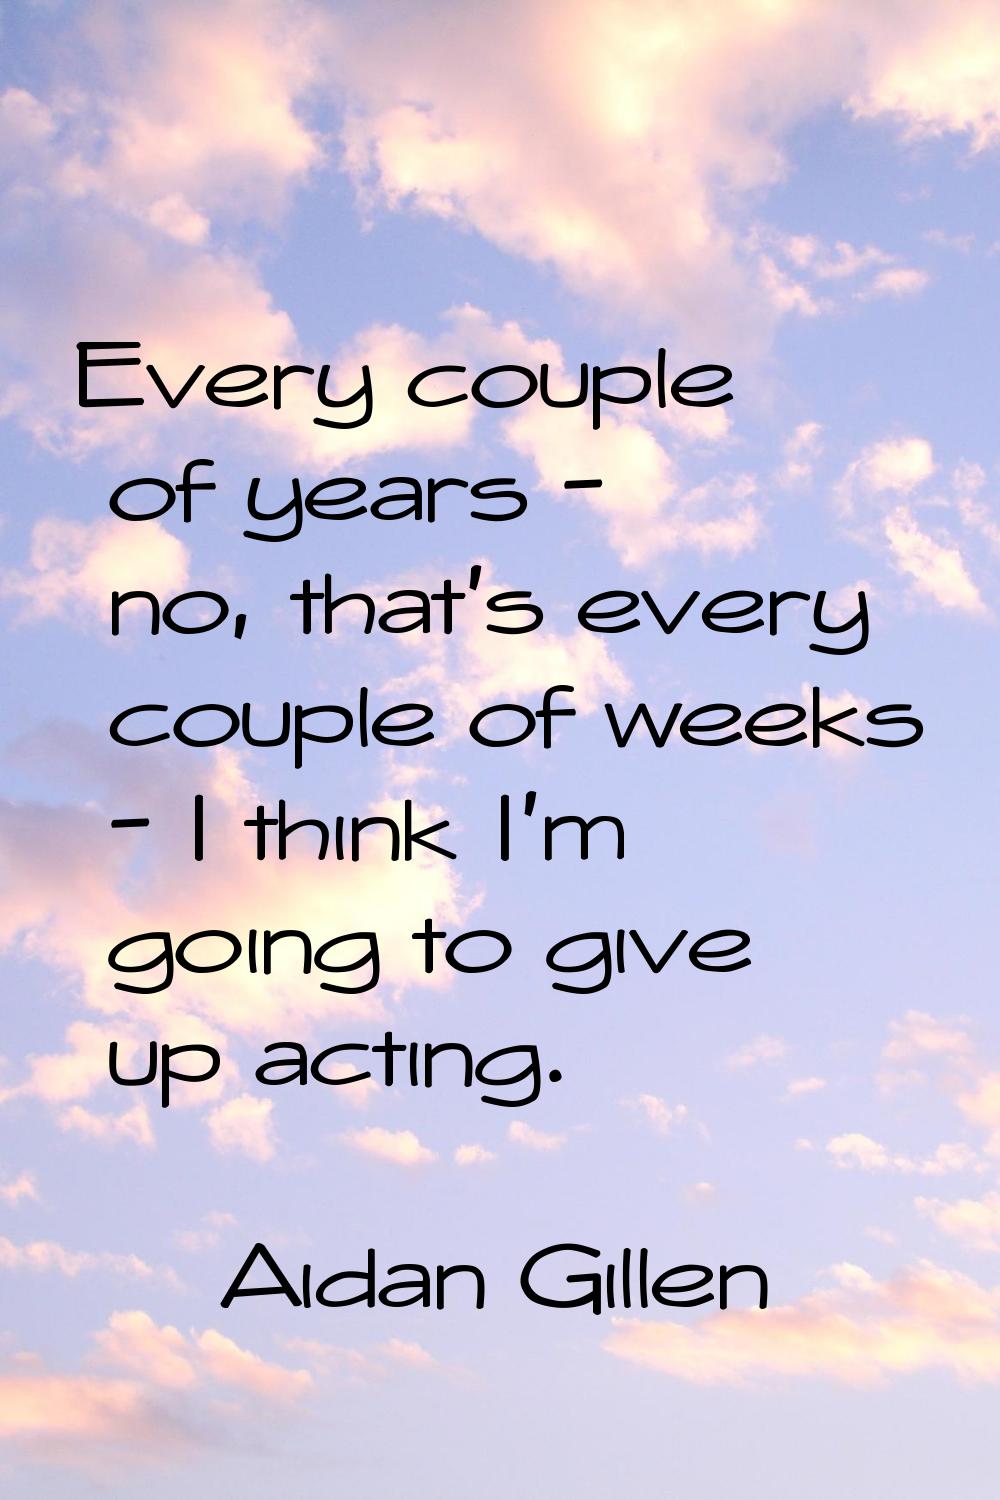 Every couple of years - no, that's every couple of weeks - I think I'm going to give up acting.